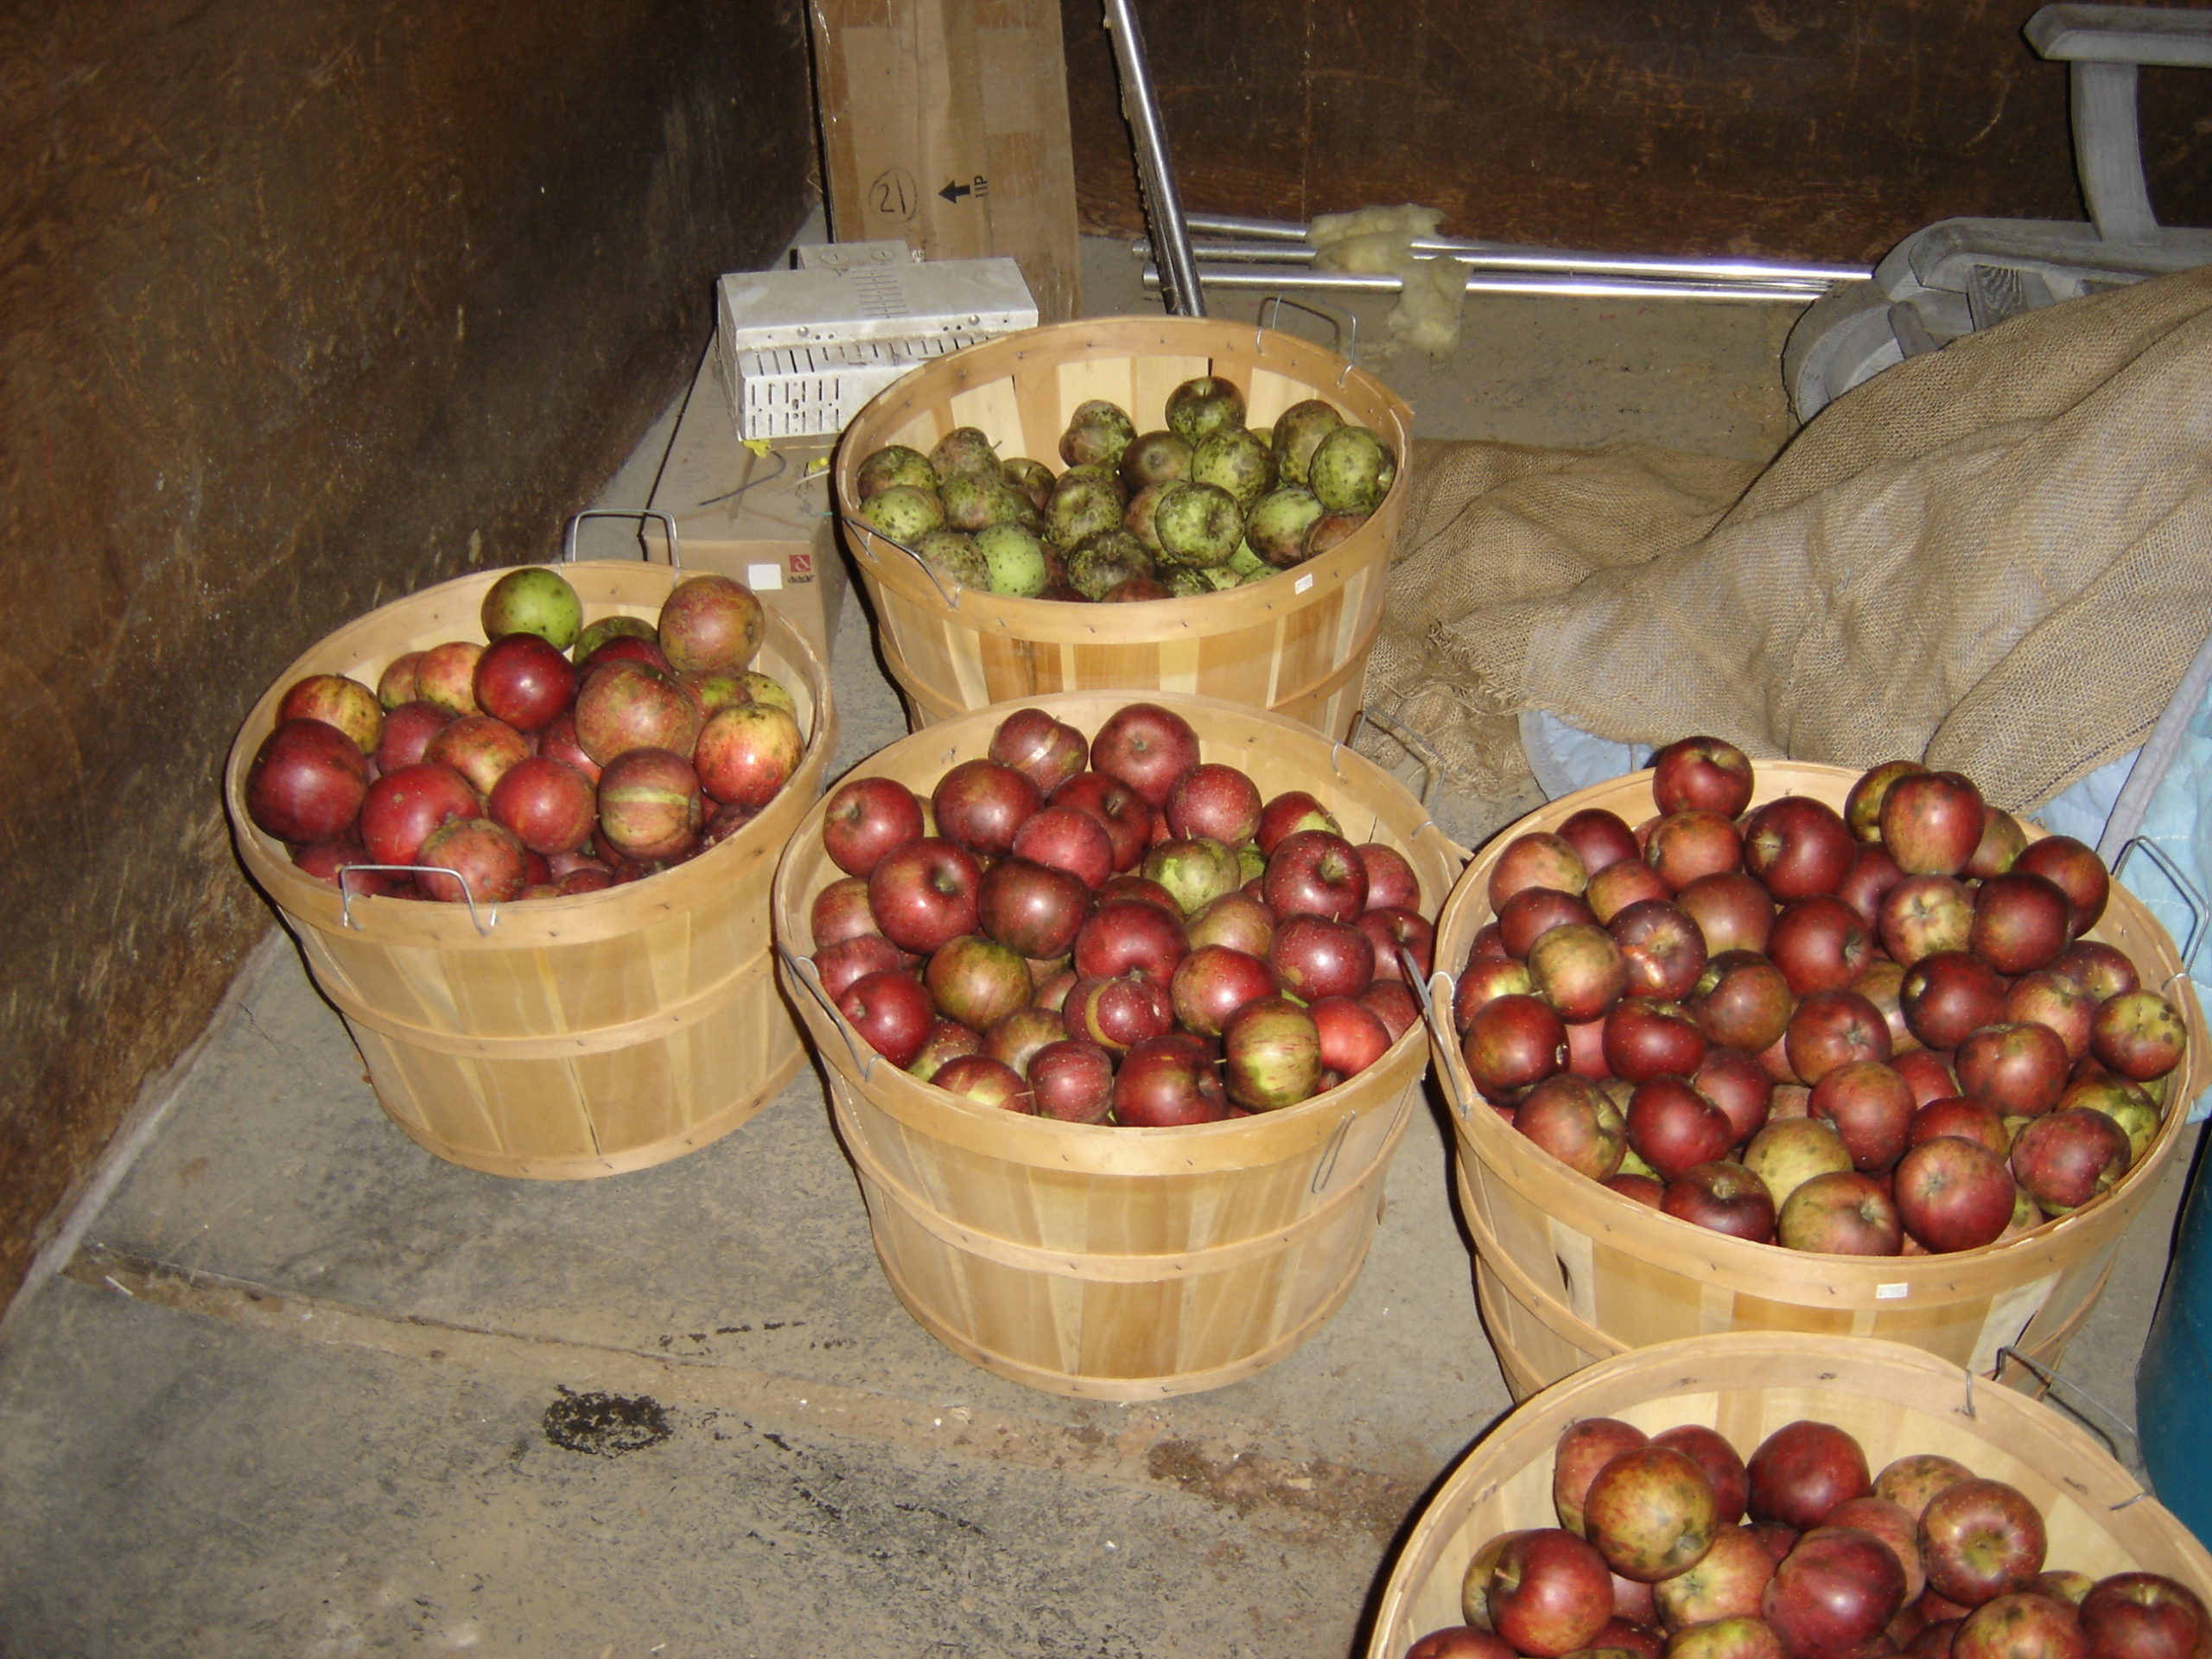 Once collected the apples are “sweated” to bring out the flavor and soften the skins. Just before going into the grinder they are well washed.  ANDREW MESSINGER